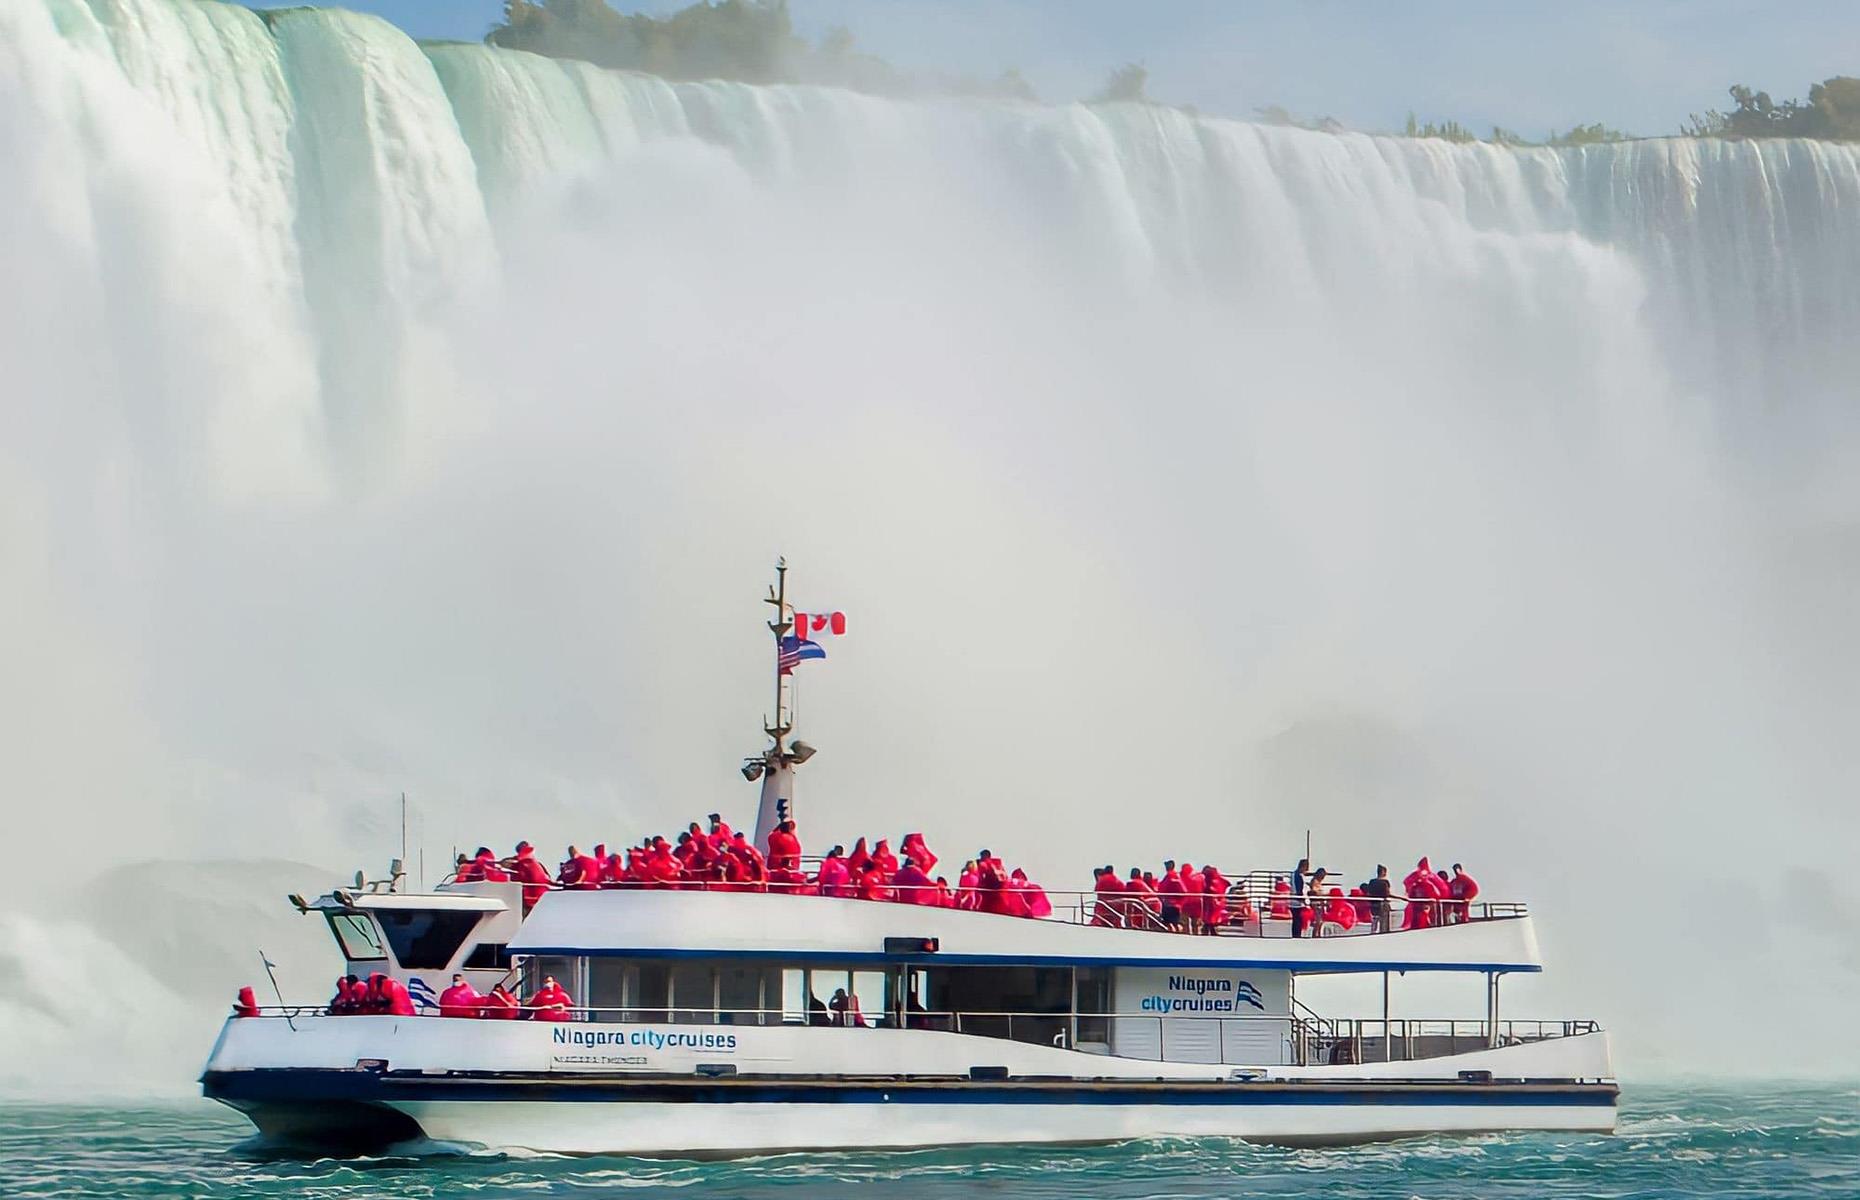 <p>Get up close and personal with the falls on board a boat tour by <a href="https://www.niagaraparks.com/visit/attractions/hornblower-niagara-cruises/">Niagara City Cruises</a>. Yet another journey of a lifetime, this 20-minute cruise allows you to enjoy amazing views of the Niagara Gorge, American and Bridal Veil Falls, before coming face-to-face with Horseshoe Falls.</p>  <p>You’re given a complimentary poncho, which you absolutely need if you’re at the front, then you can sit back (or stand) and let the audio commentary tell you all about this incredible natural marvel.</p>